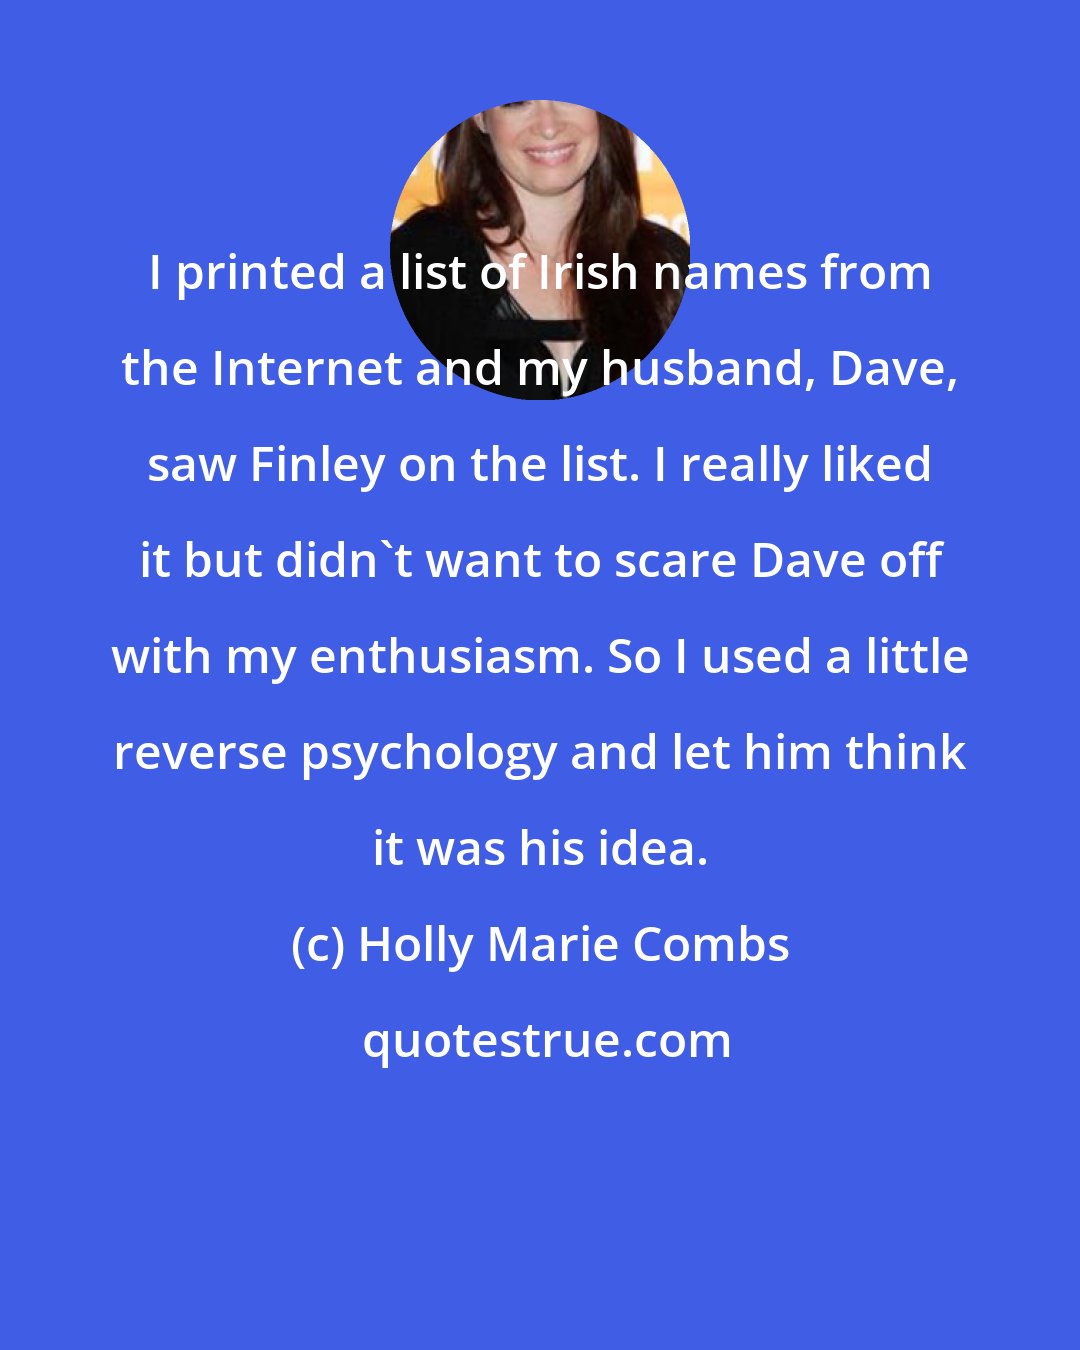 Holly Marie Combs: I printed a list of Irish names from the Internet and my husband, Dave, saw Finley on the list. I really liked it but didn't want to scare Dave off with my enthusiasm. So I used a little reverse psychology and let him think it was his idea.